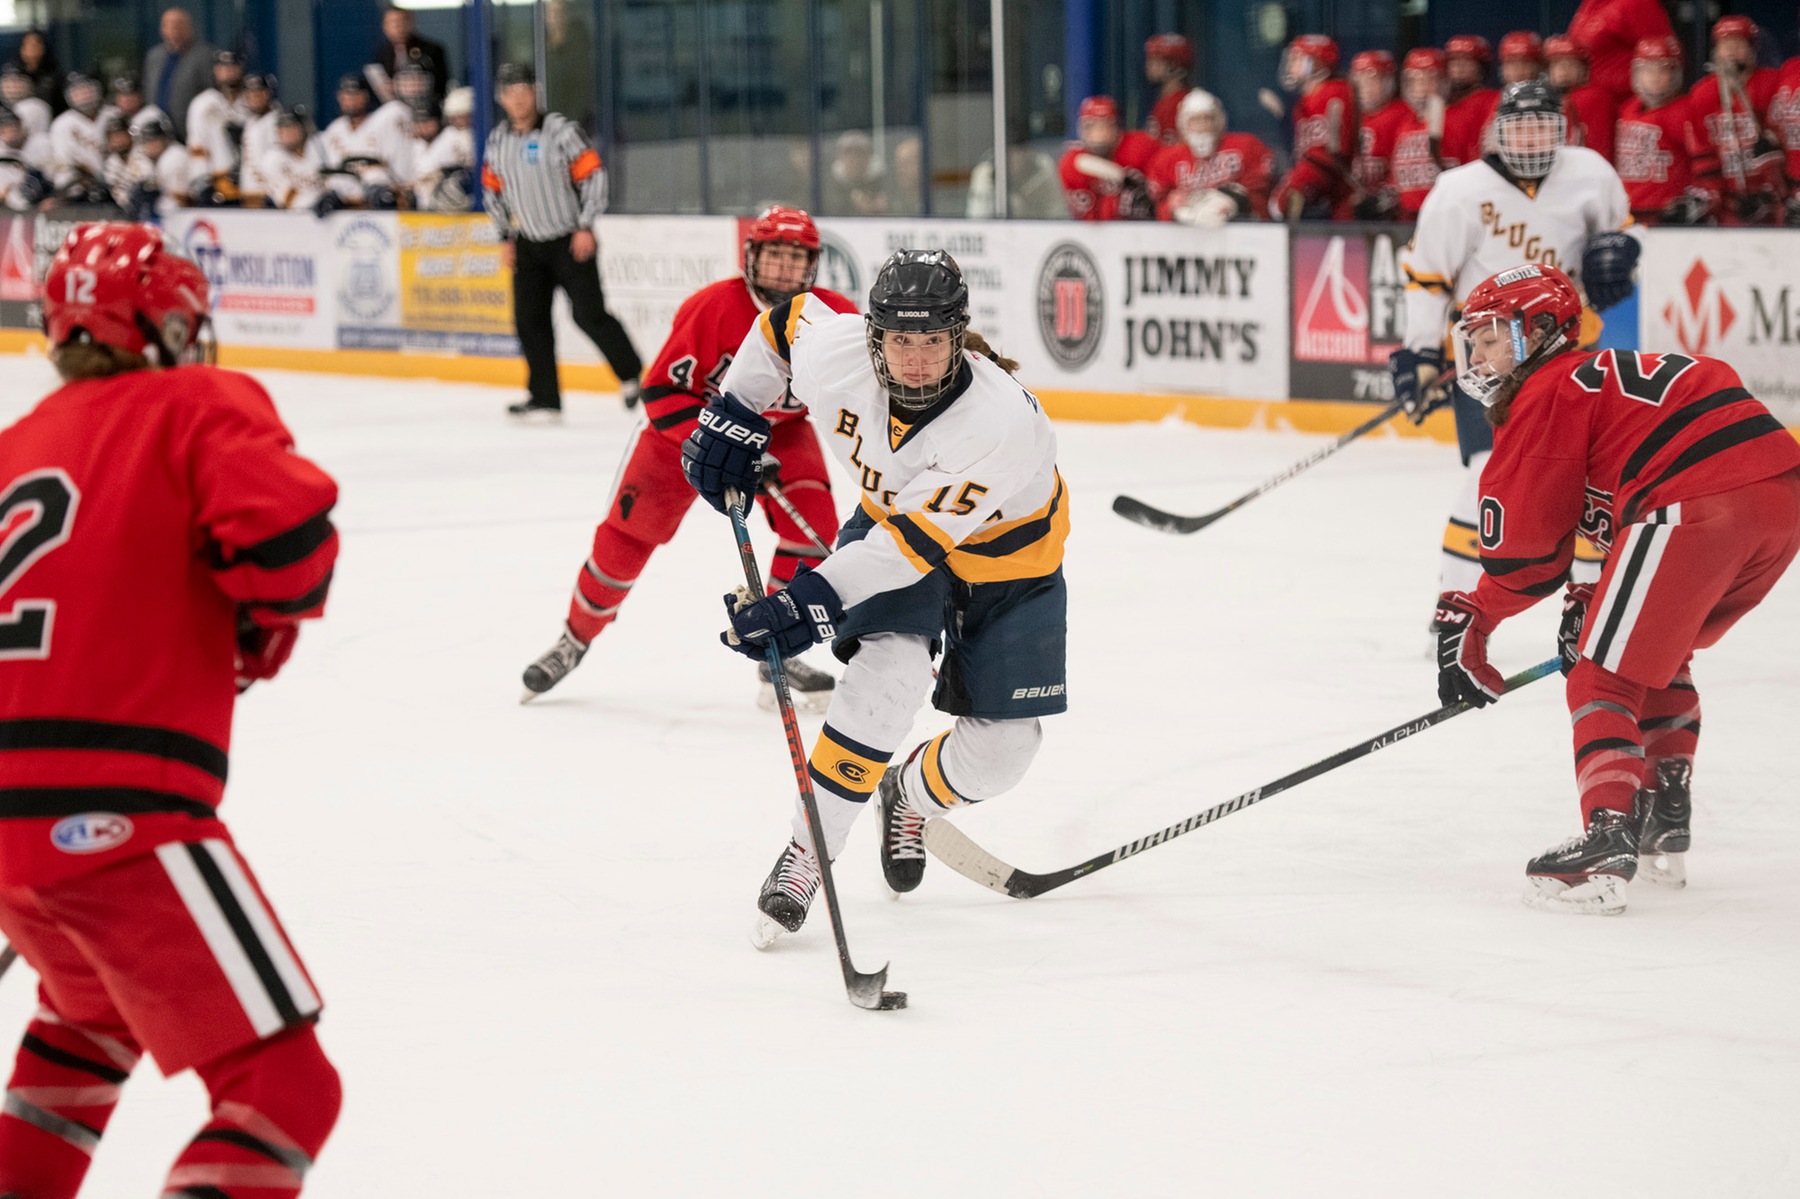 Connolly and Blugolds remain unbeaten at home